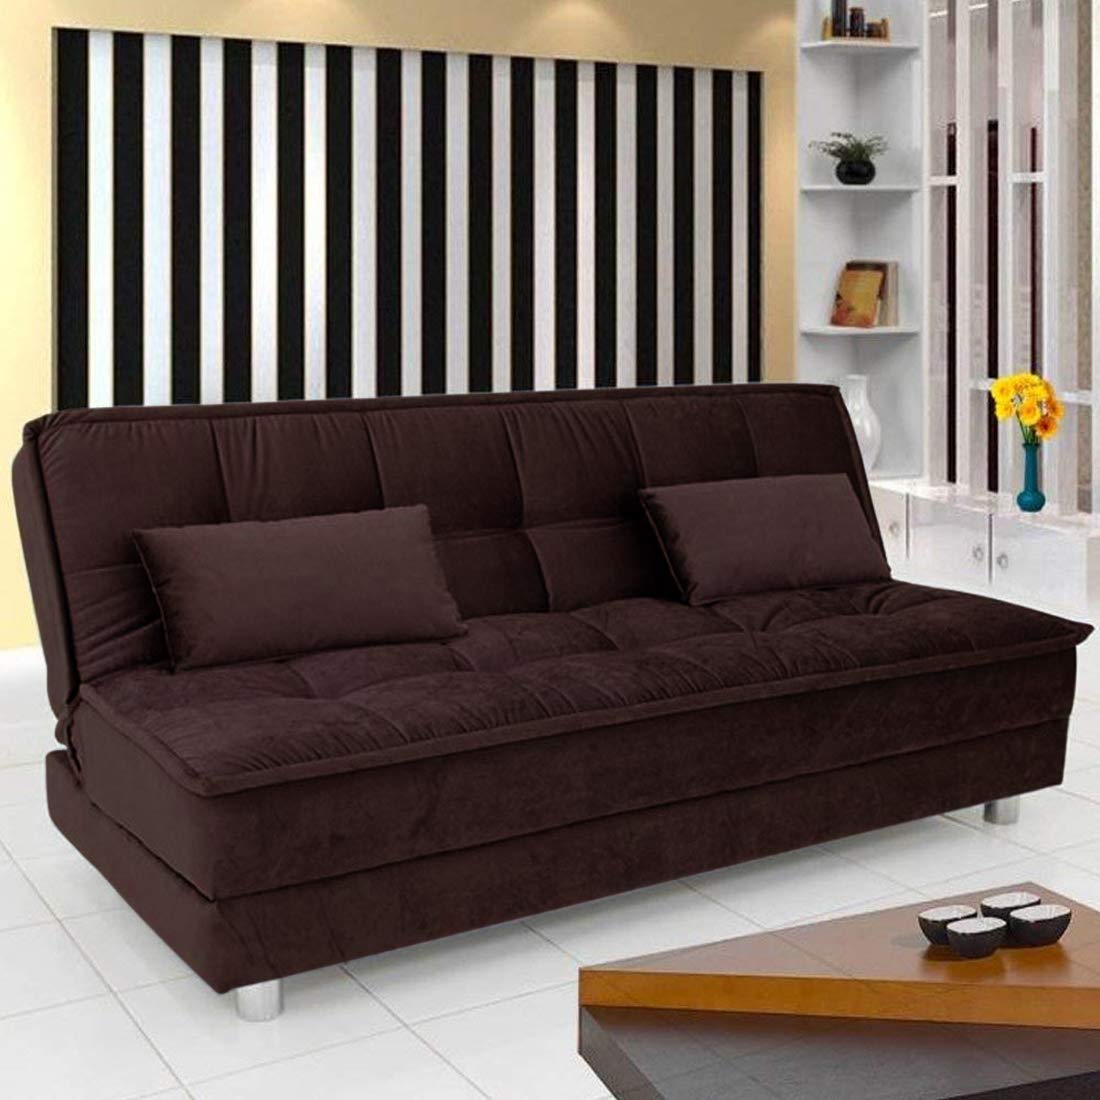 Furny 3 Seater Gaiety Supersoft Fabric Sofa Cum Bed